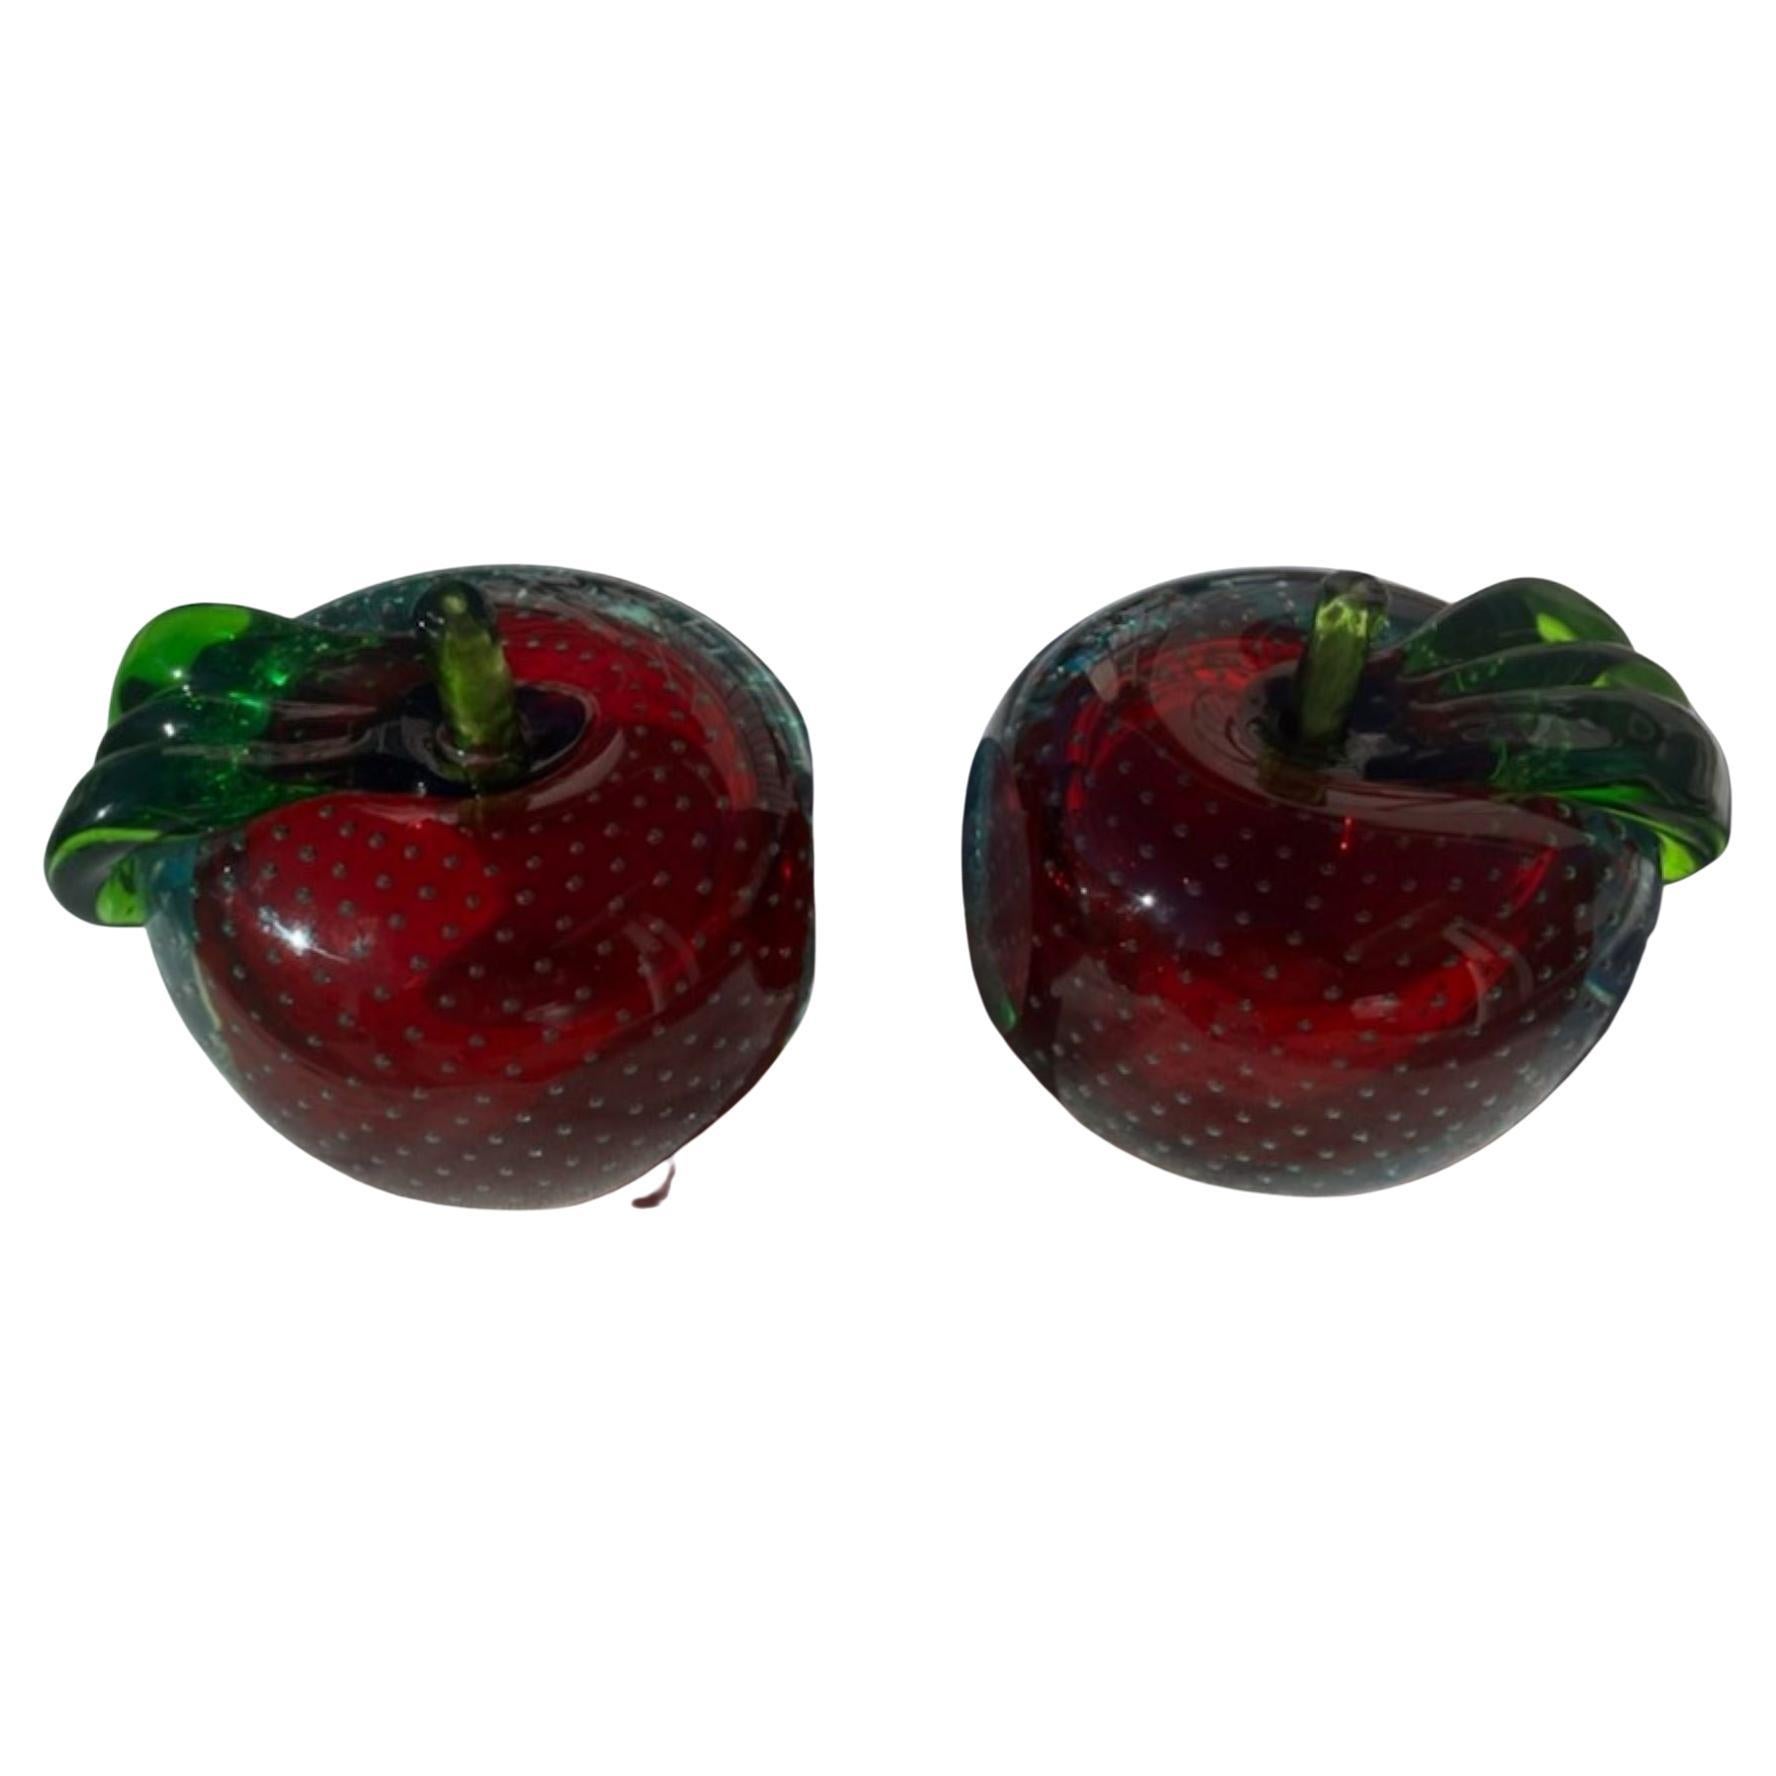 Modern Early Italian Art Glass pair of Apples Bookends  For Sale